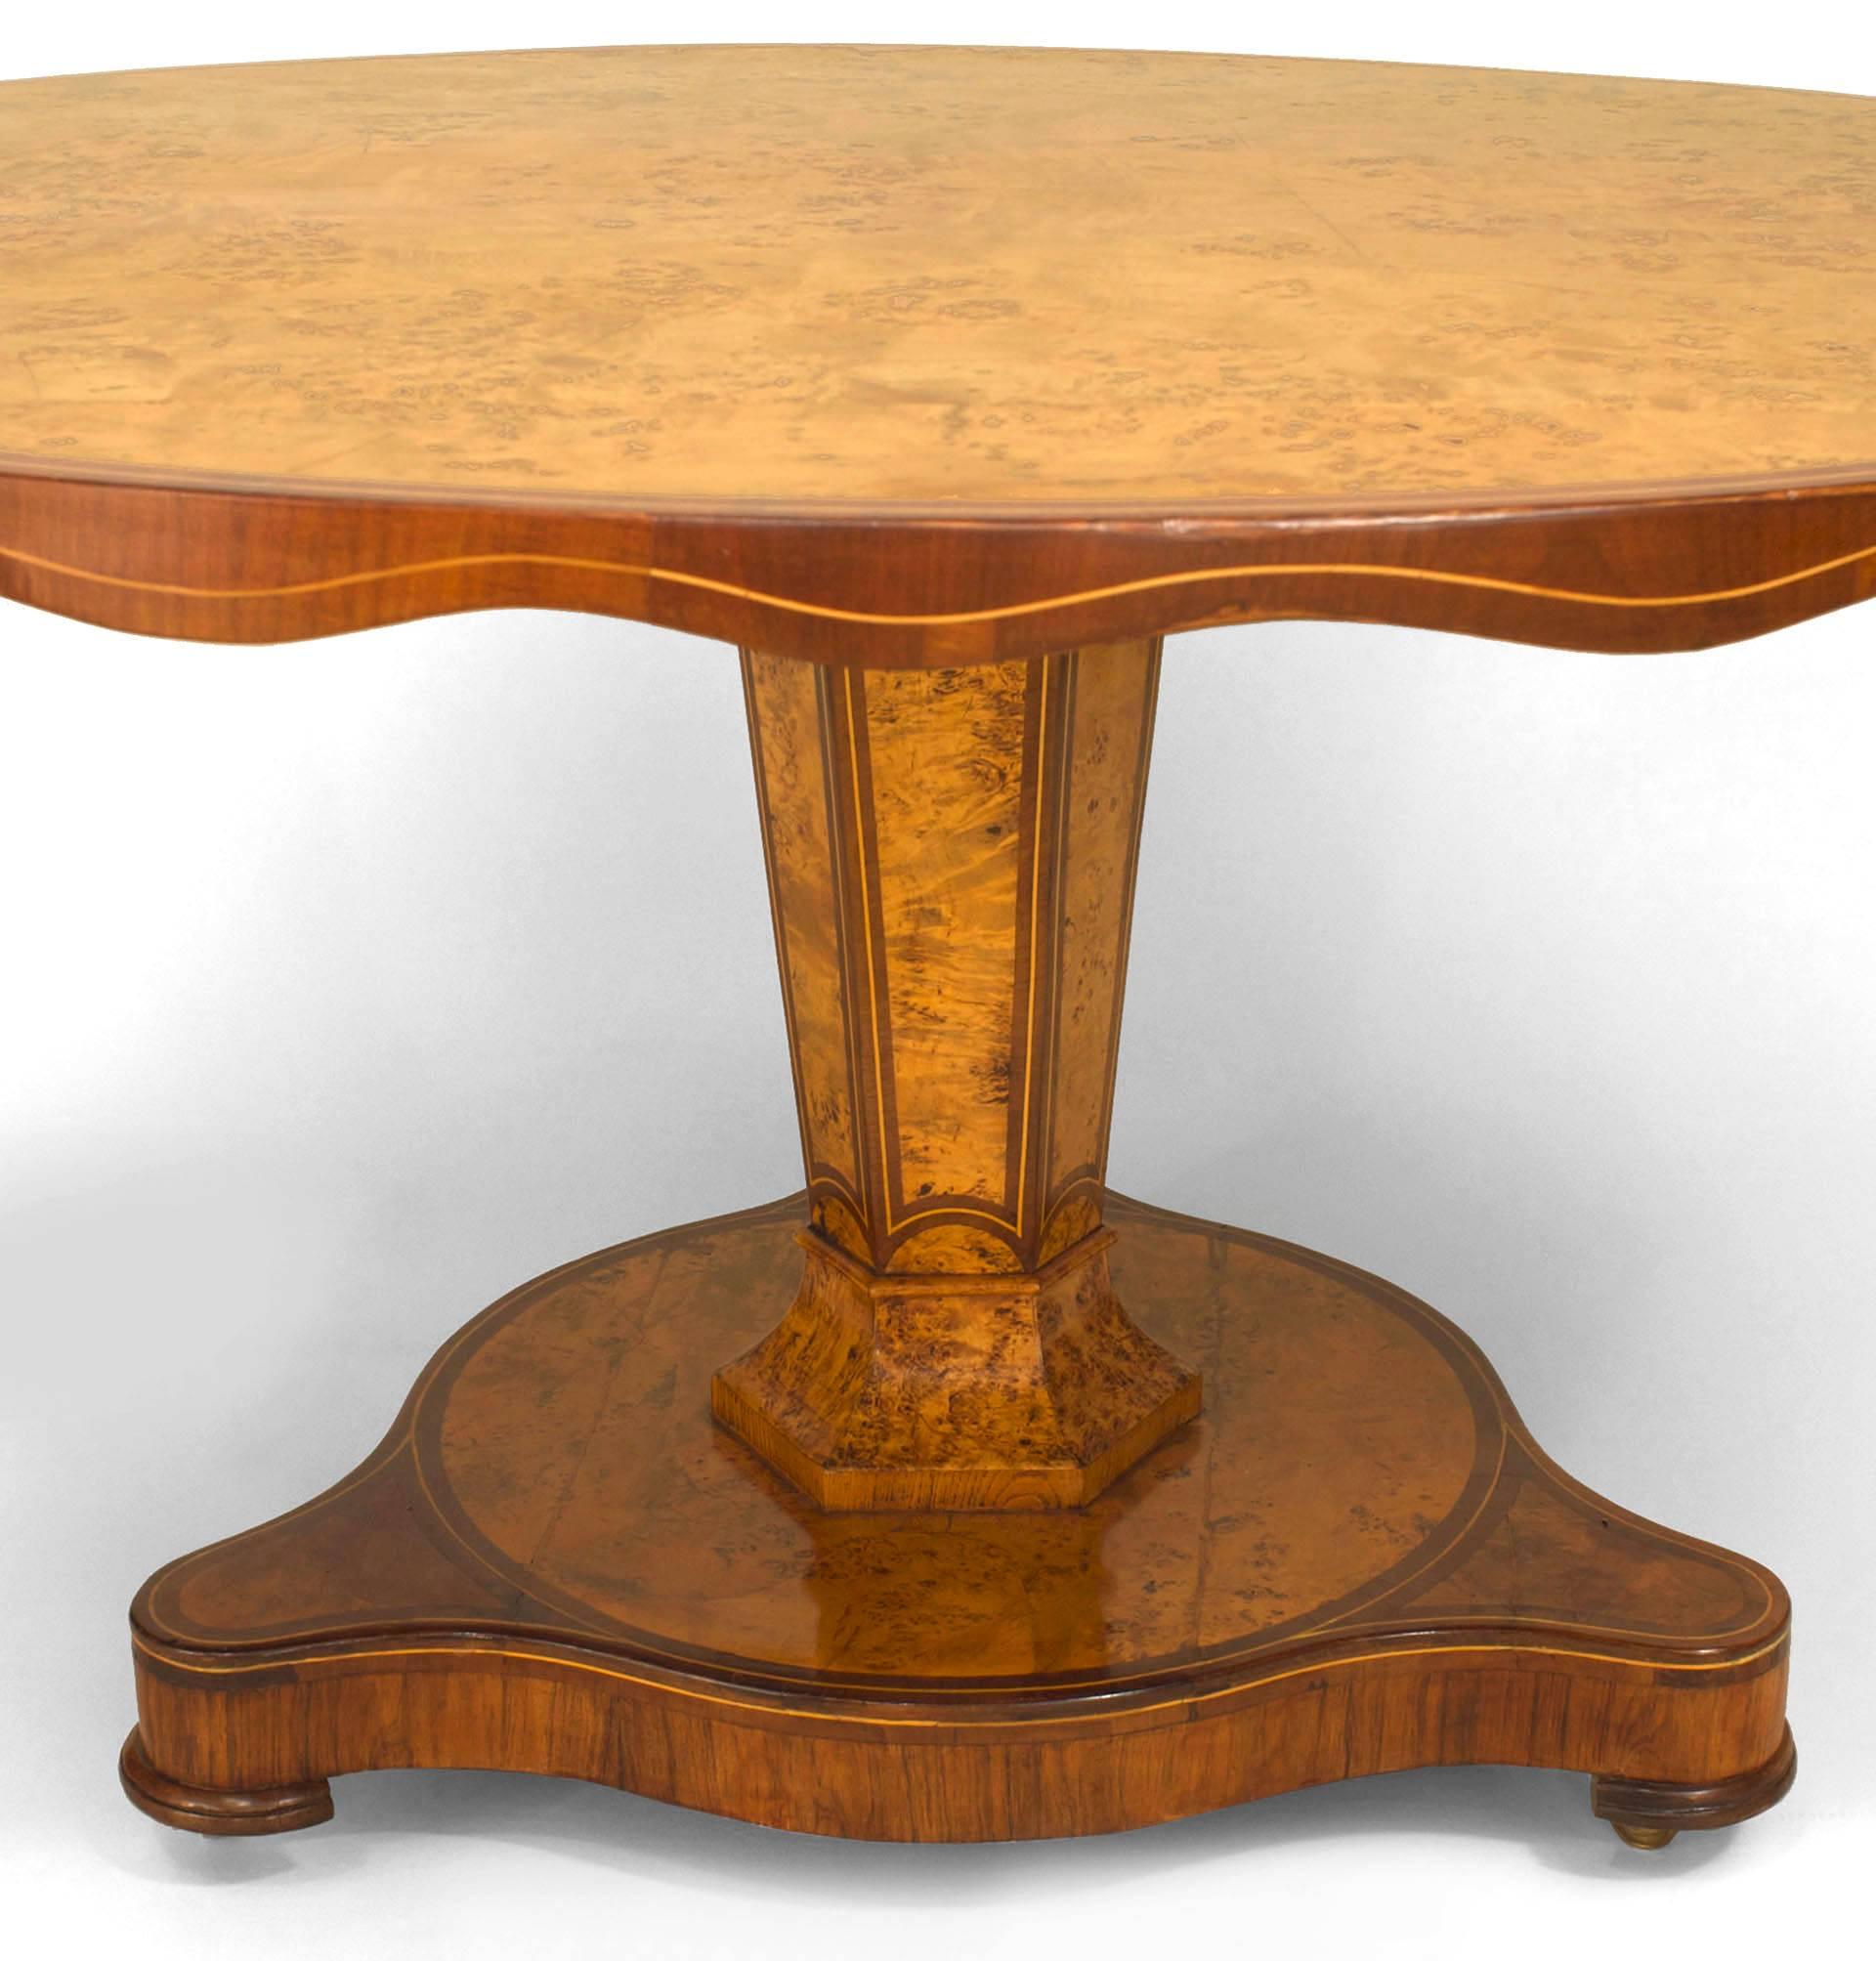 Continental possibly Baltic (circa 1850s) burl wood and mahogany trim center table with an octagonal base supported on a triangular base with a top having a scalloped apron.
